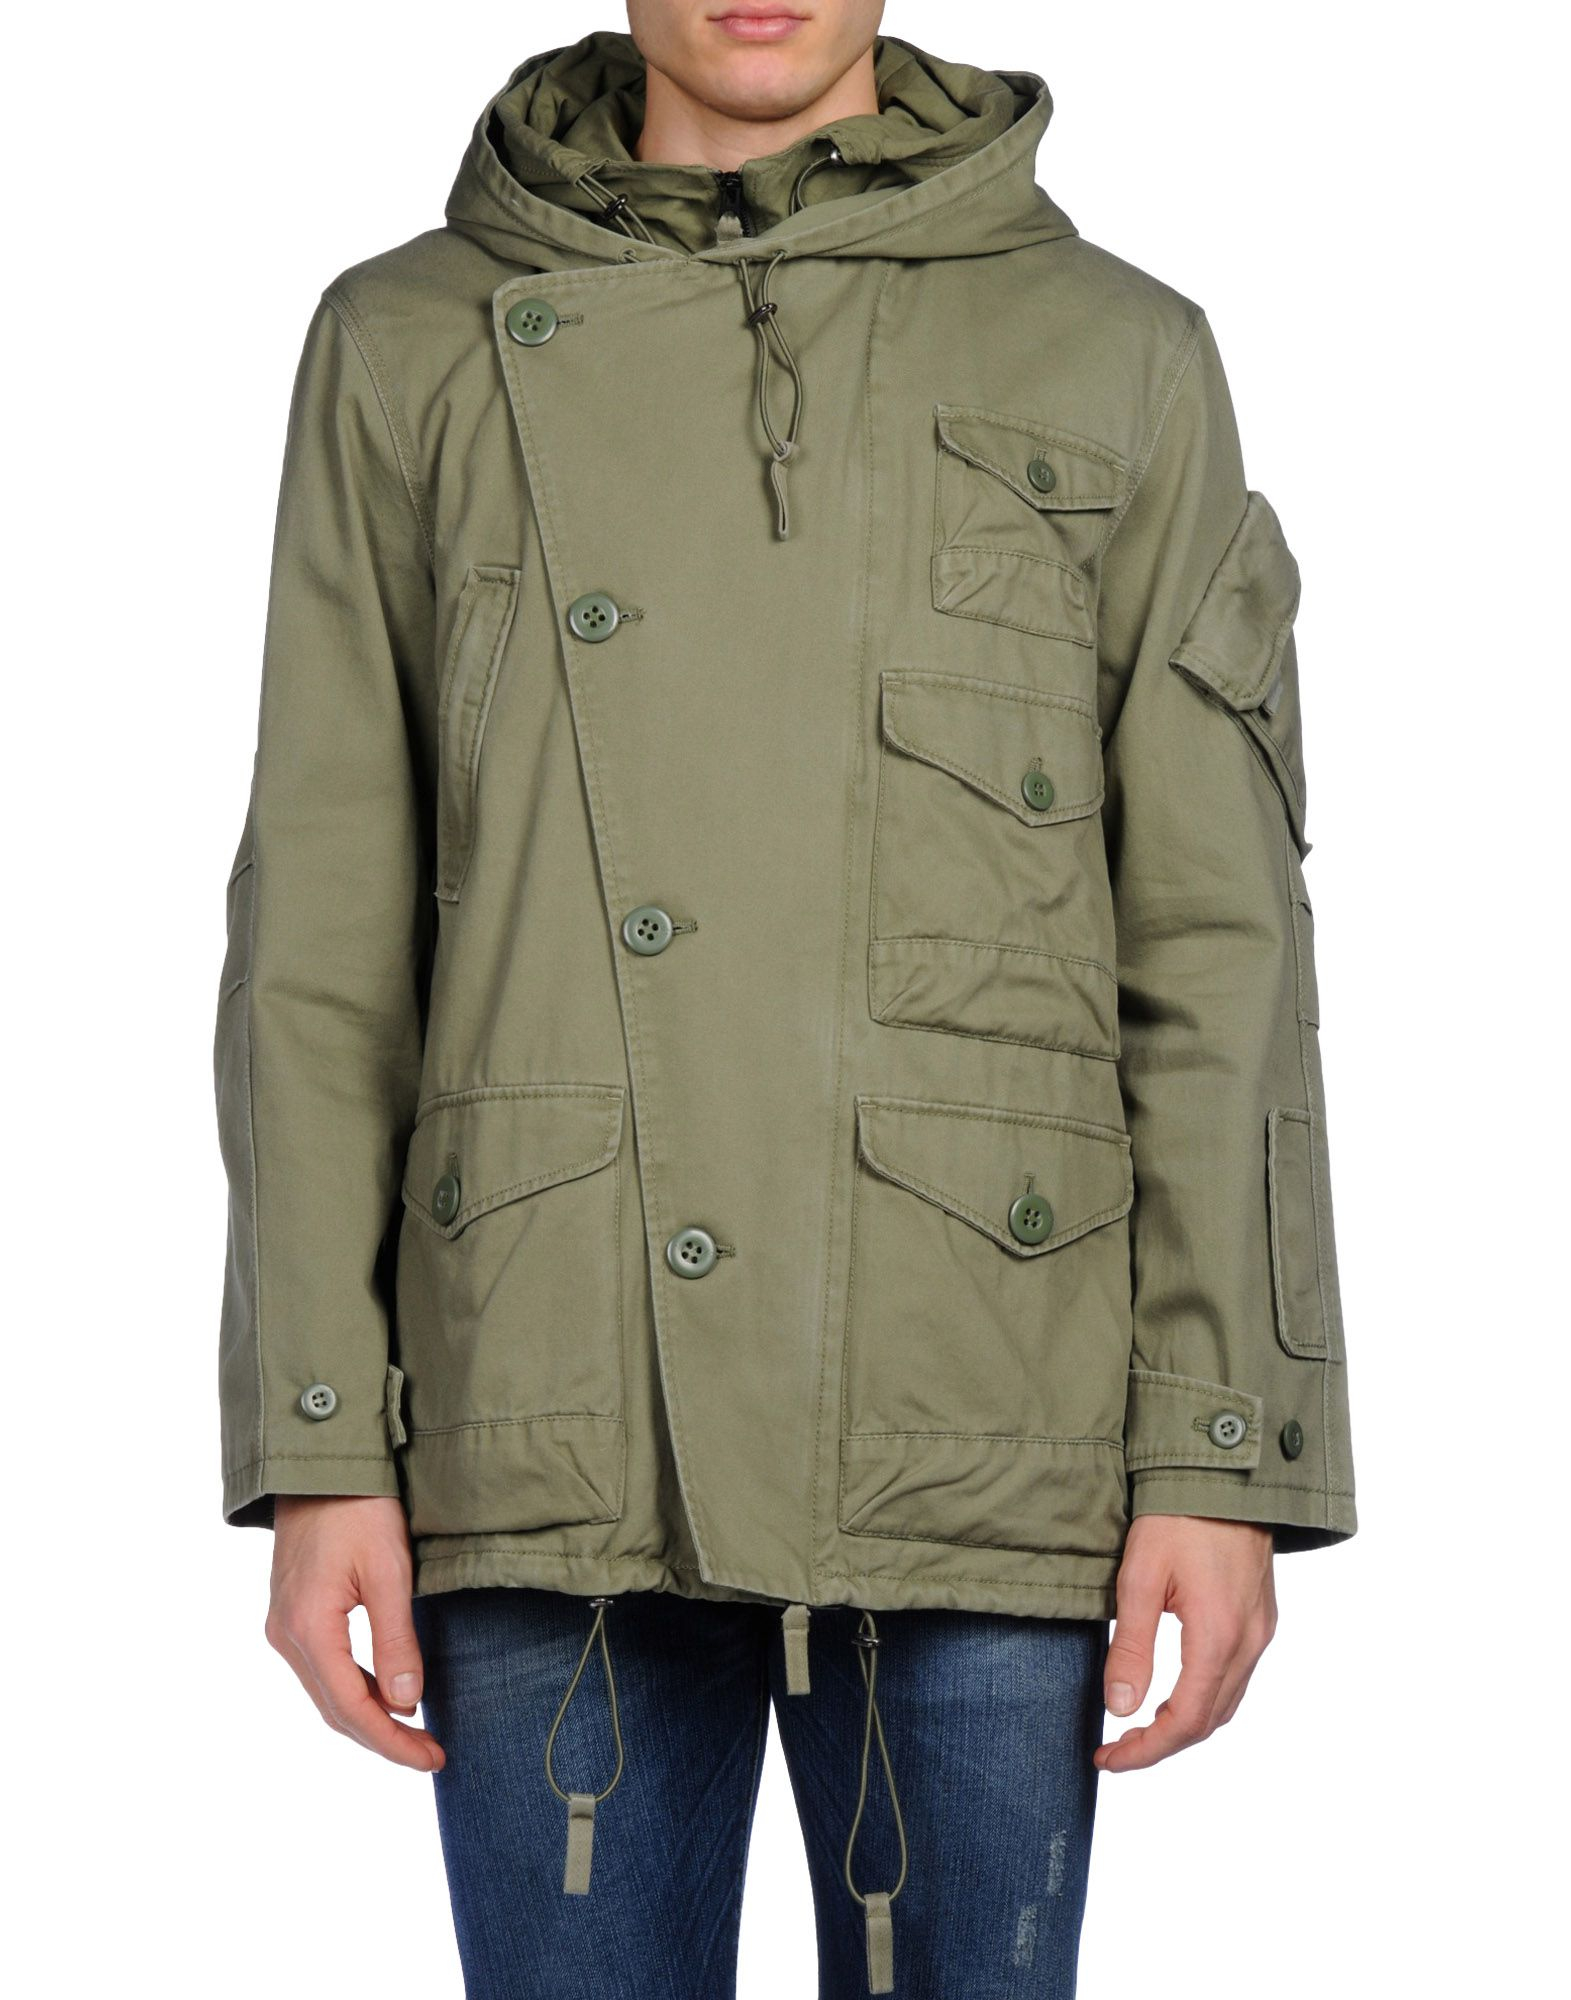 Lyst - French Connection Jacket in Green for Men